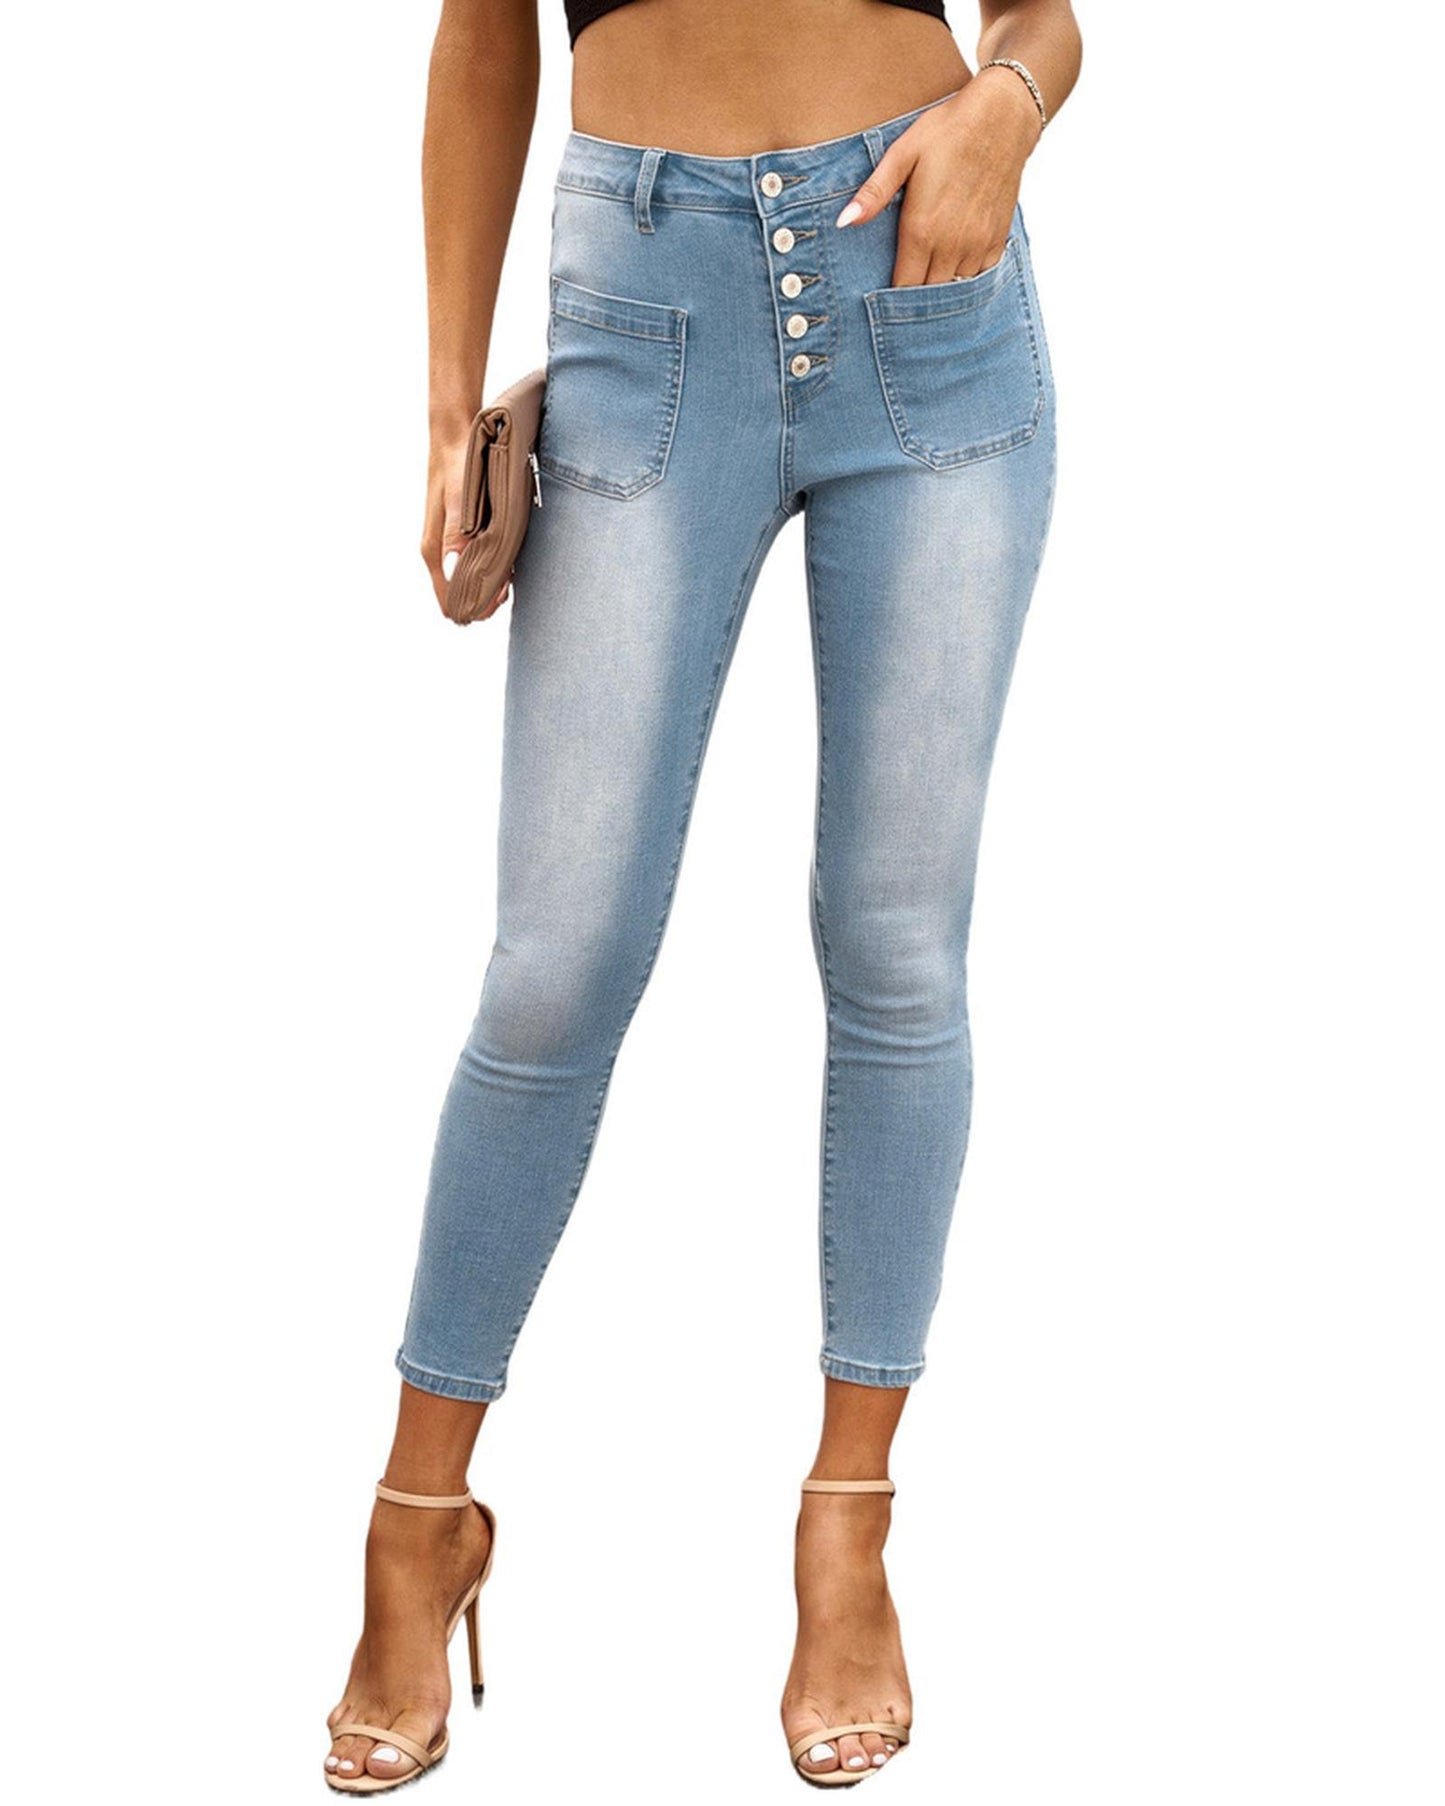 Azura Exchange Button Fly Skinny Jeans with Pockets - S